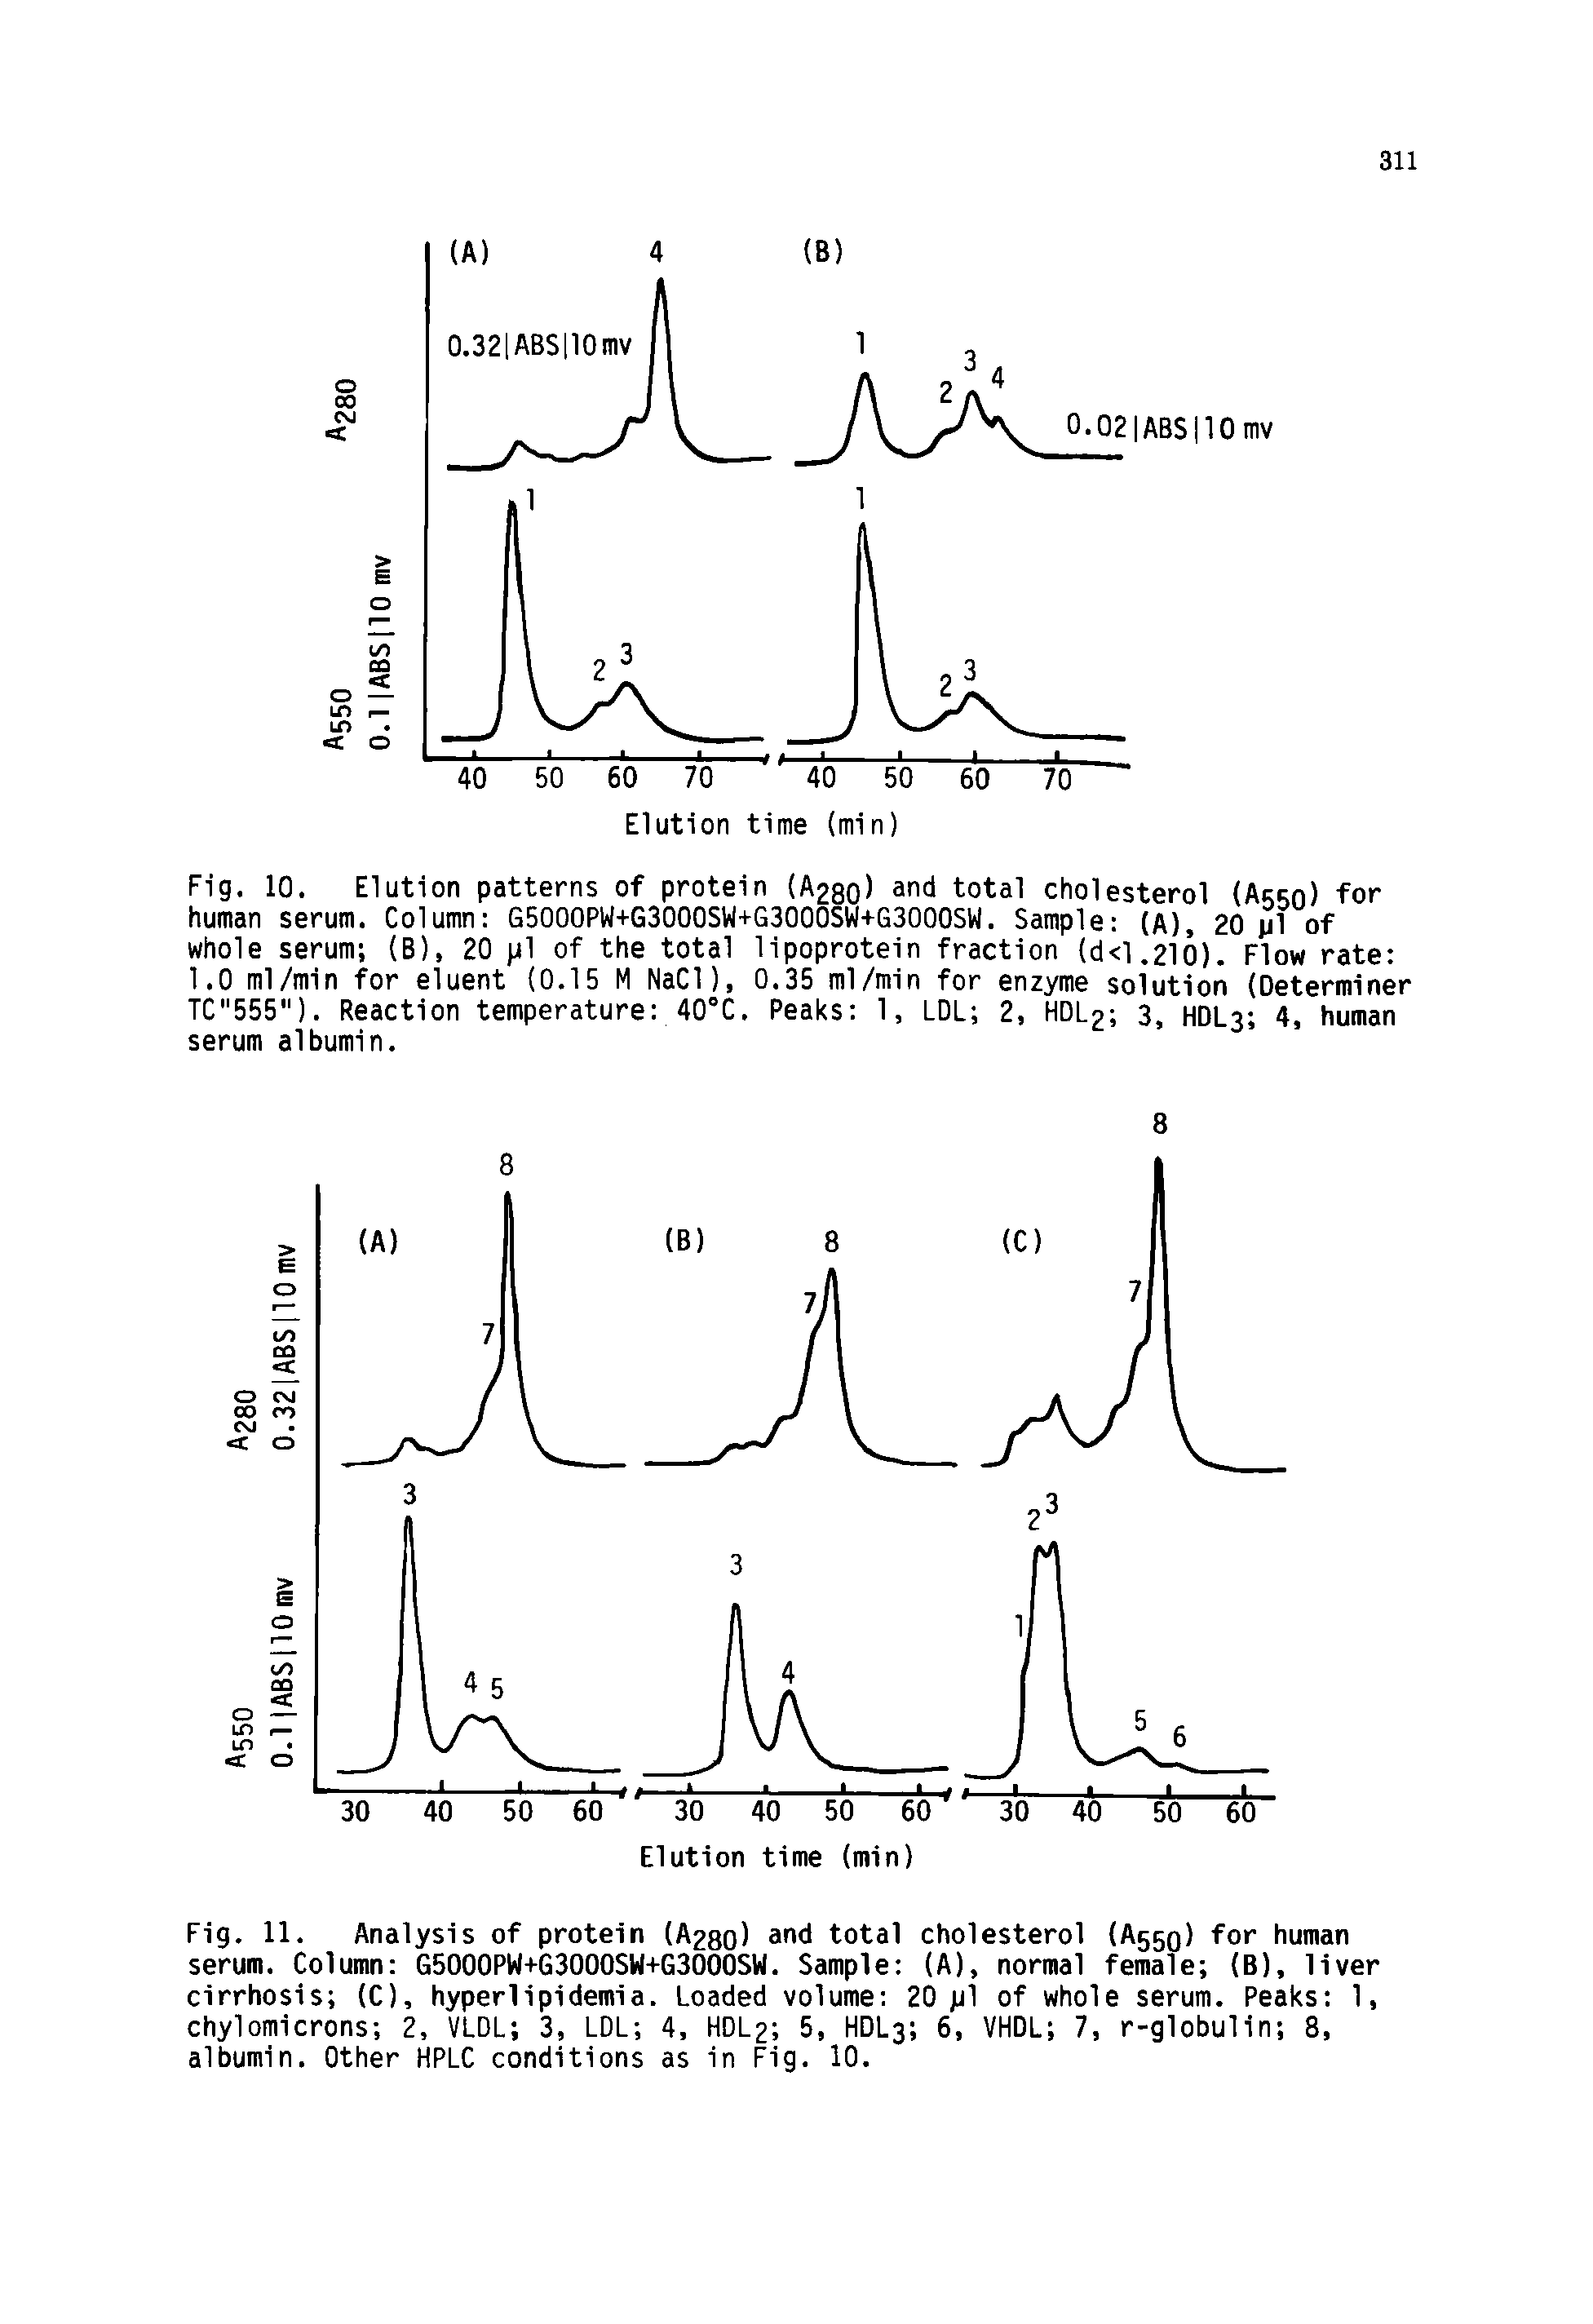 Fig. 10. Elution patterns of protein (A280) and total cholesterol (A550) for human serum. Column G5000PW+G3000SW+G3000SW+G3000SW. Sample (A), 20 pi of whole serum (B), 20 pi of the total lipoprotein fraction (d<1.210). Flow rate 1.0 ml/min for eluent 0.15 M NaCl), 0.35 ml/min for enzyme solution (Determiner TC"555"). Reaction temperature 40°C. Peaks 1, LDL 2, HDLg 3, HDL3 4, human serum albumin.